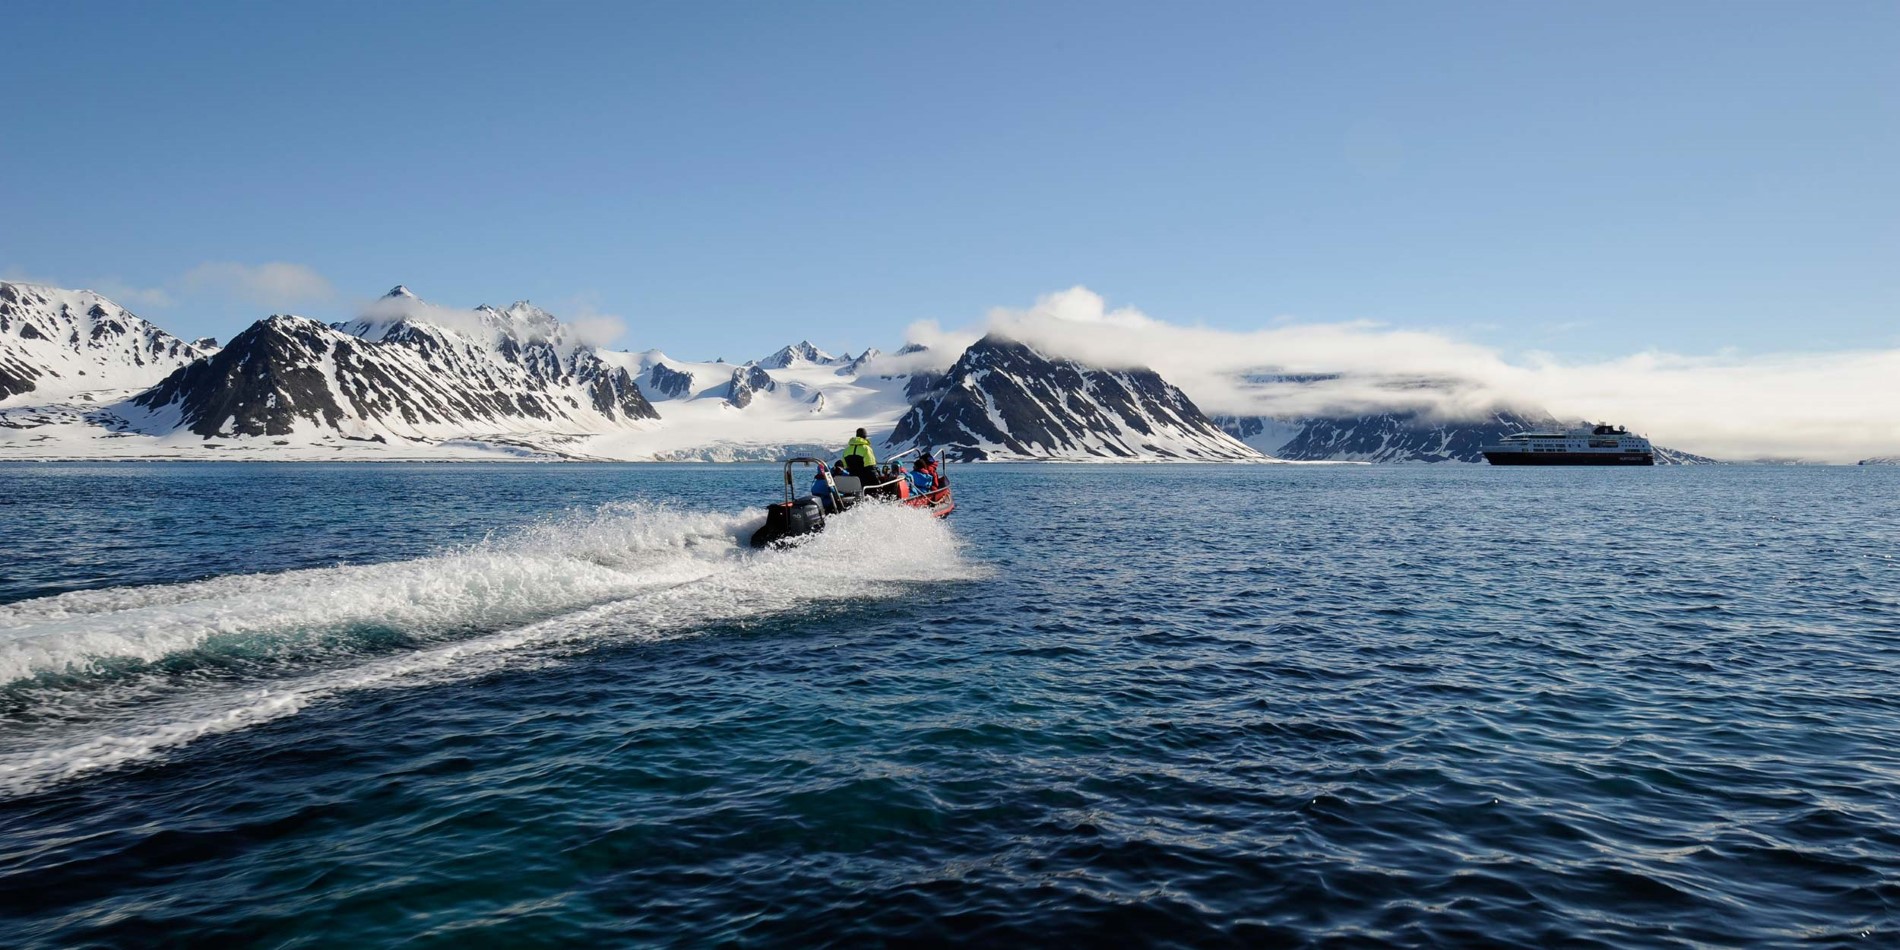 We use our PolarCirkel boats to cruise in fjords and get close to the wildlife